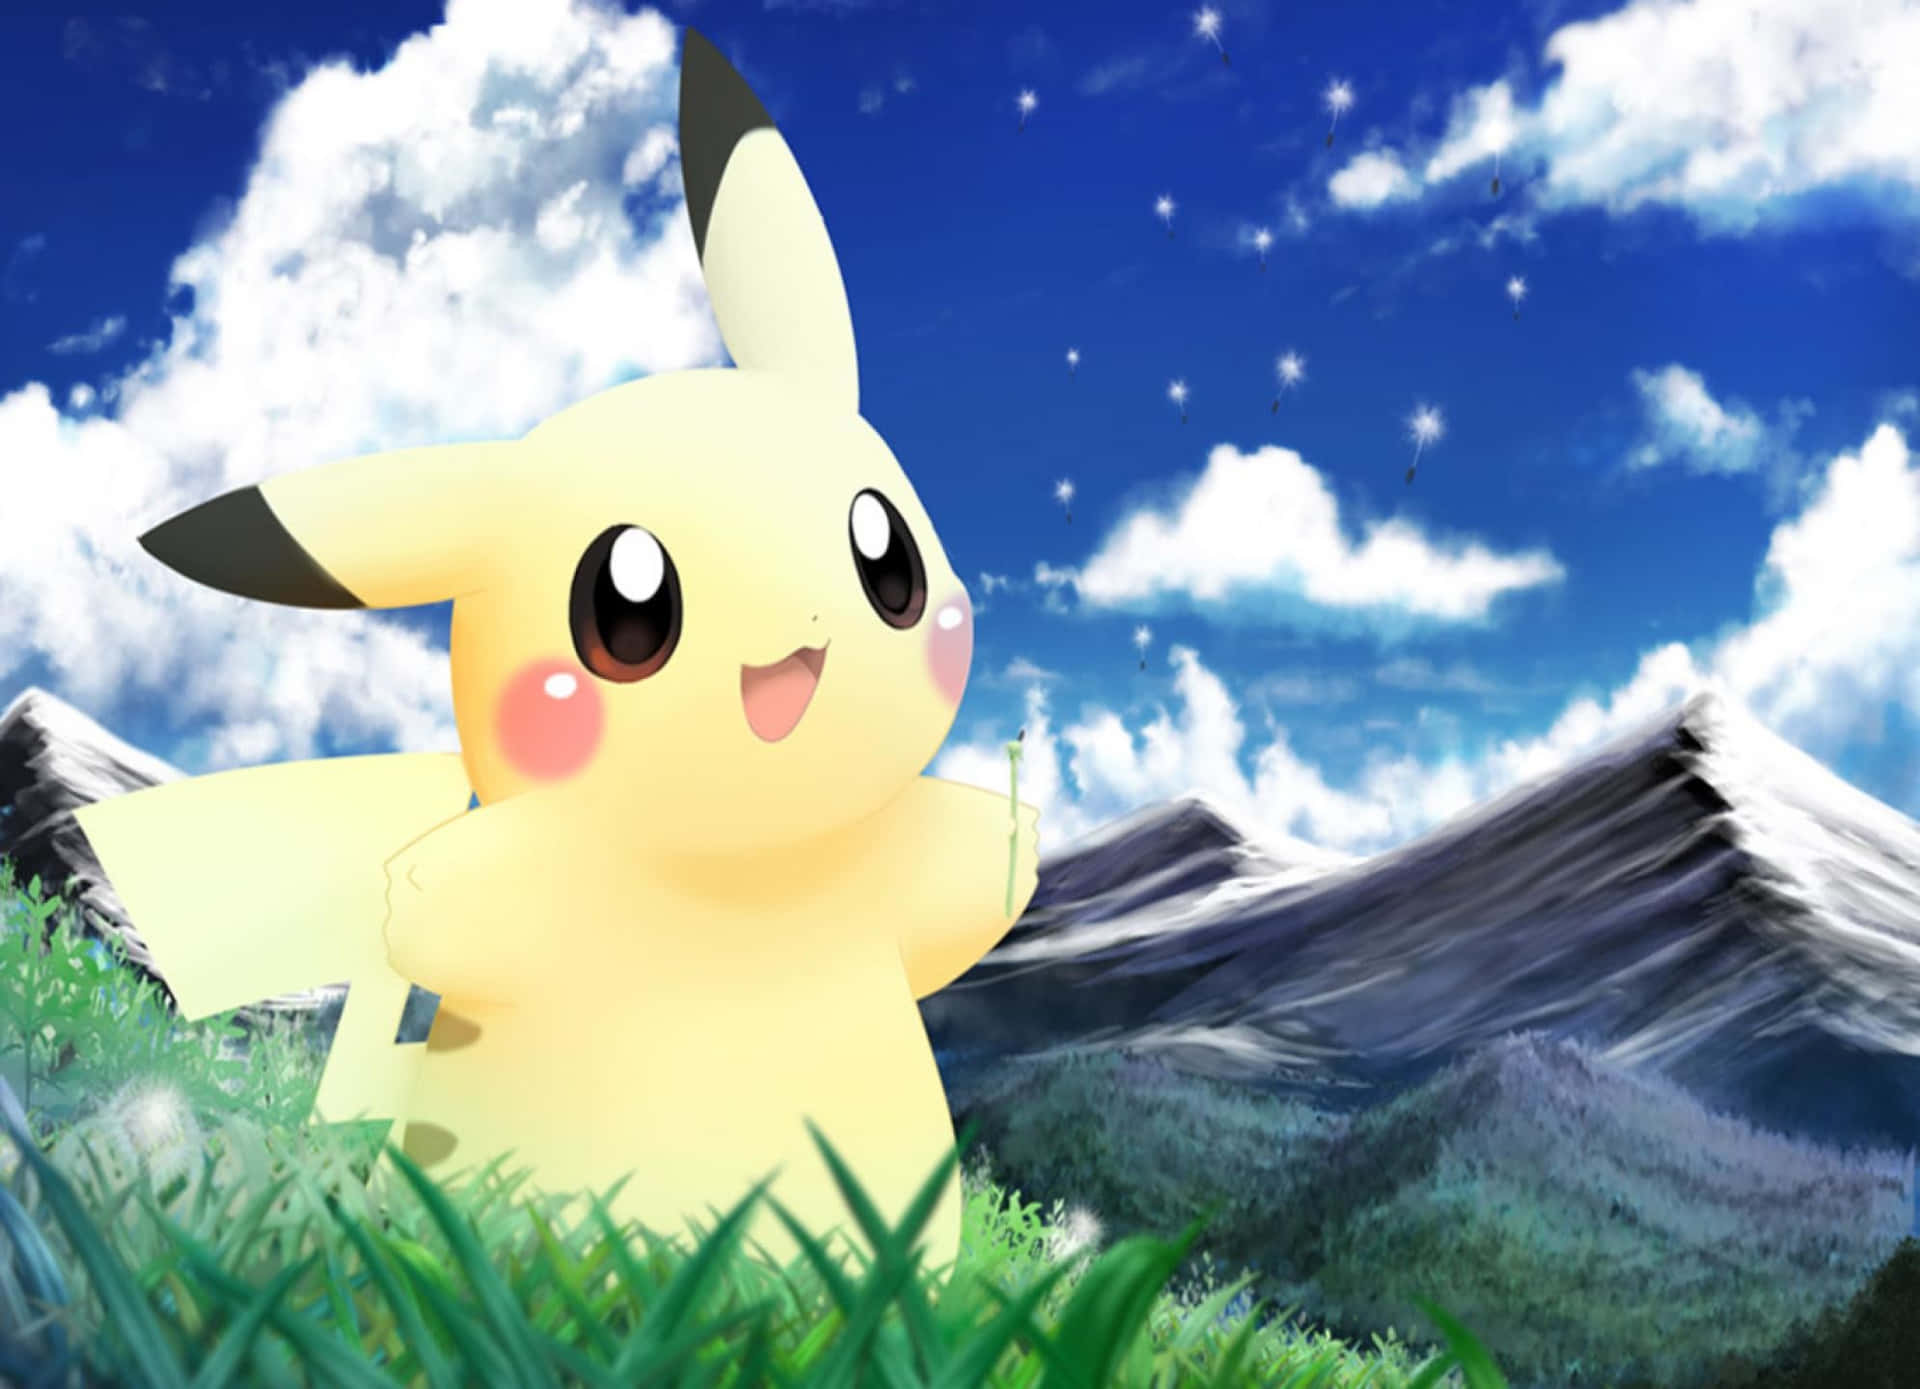 This Little Baby Pikachu Is So Cute! Wallpaper